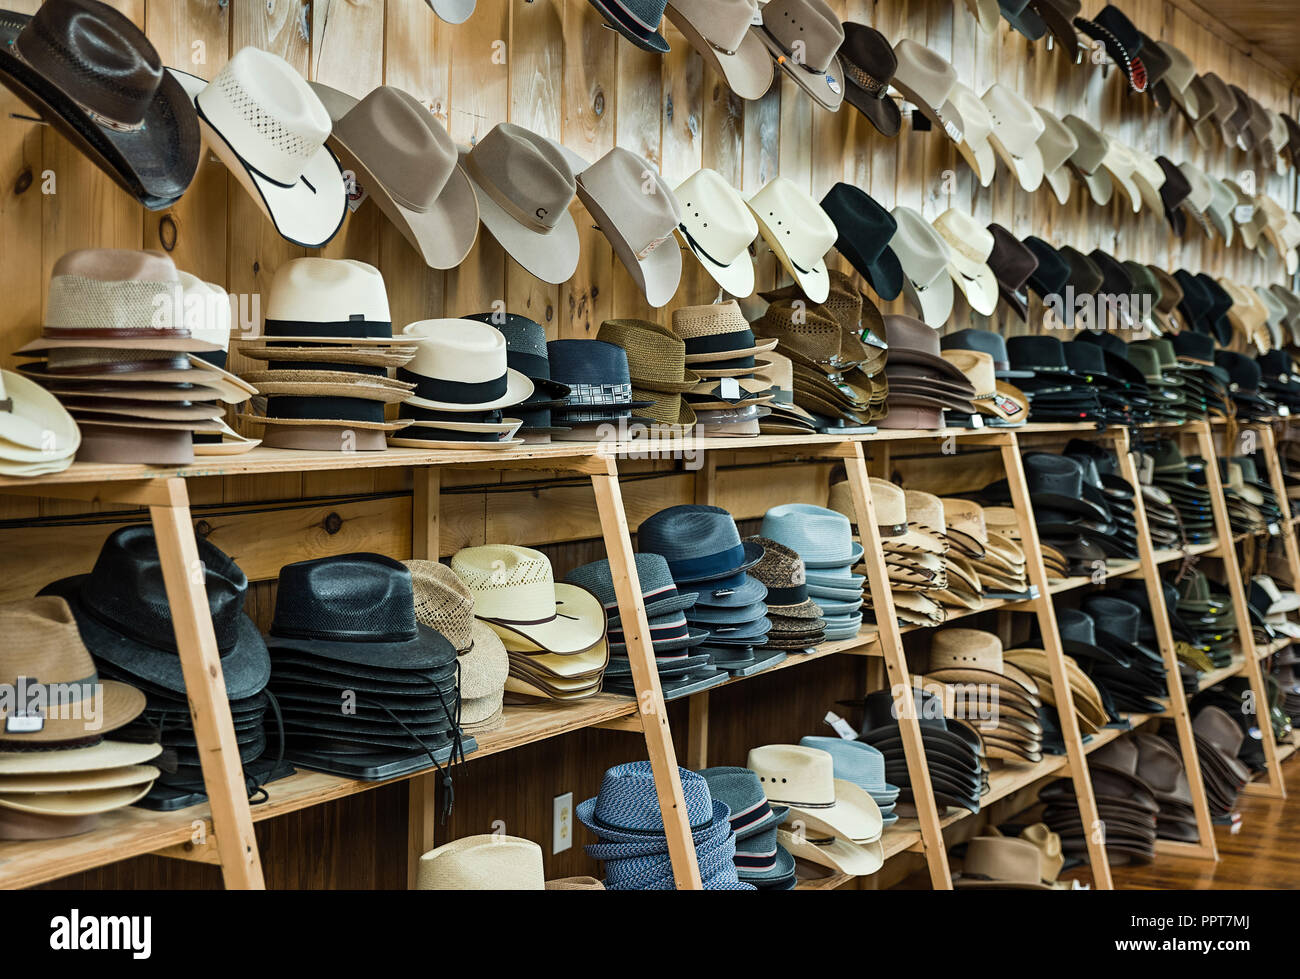 Cowboy Hat Store High Resolution Stock Photography and Images - Alamy